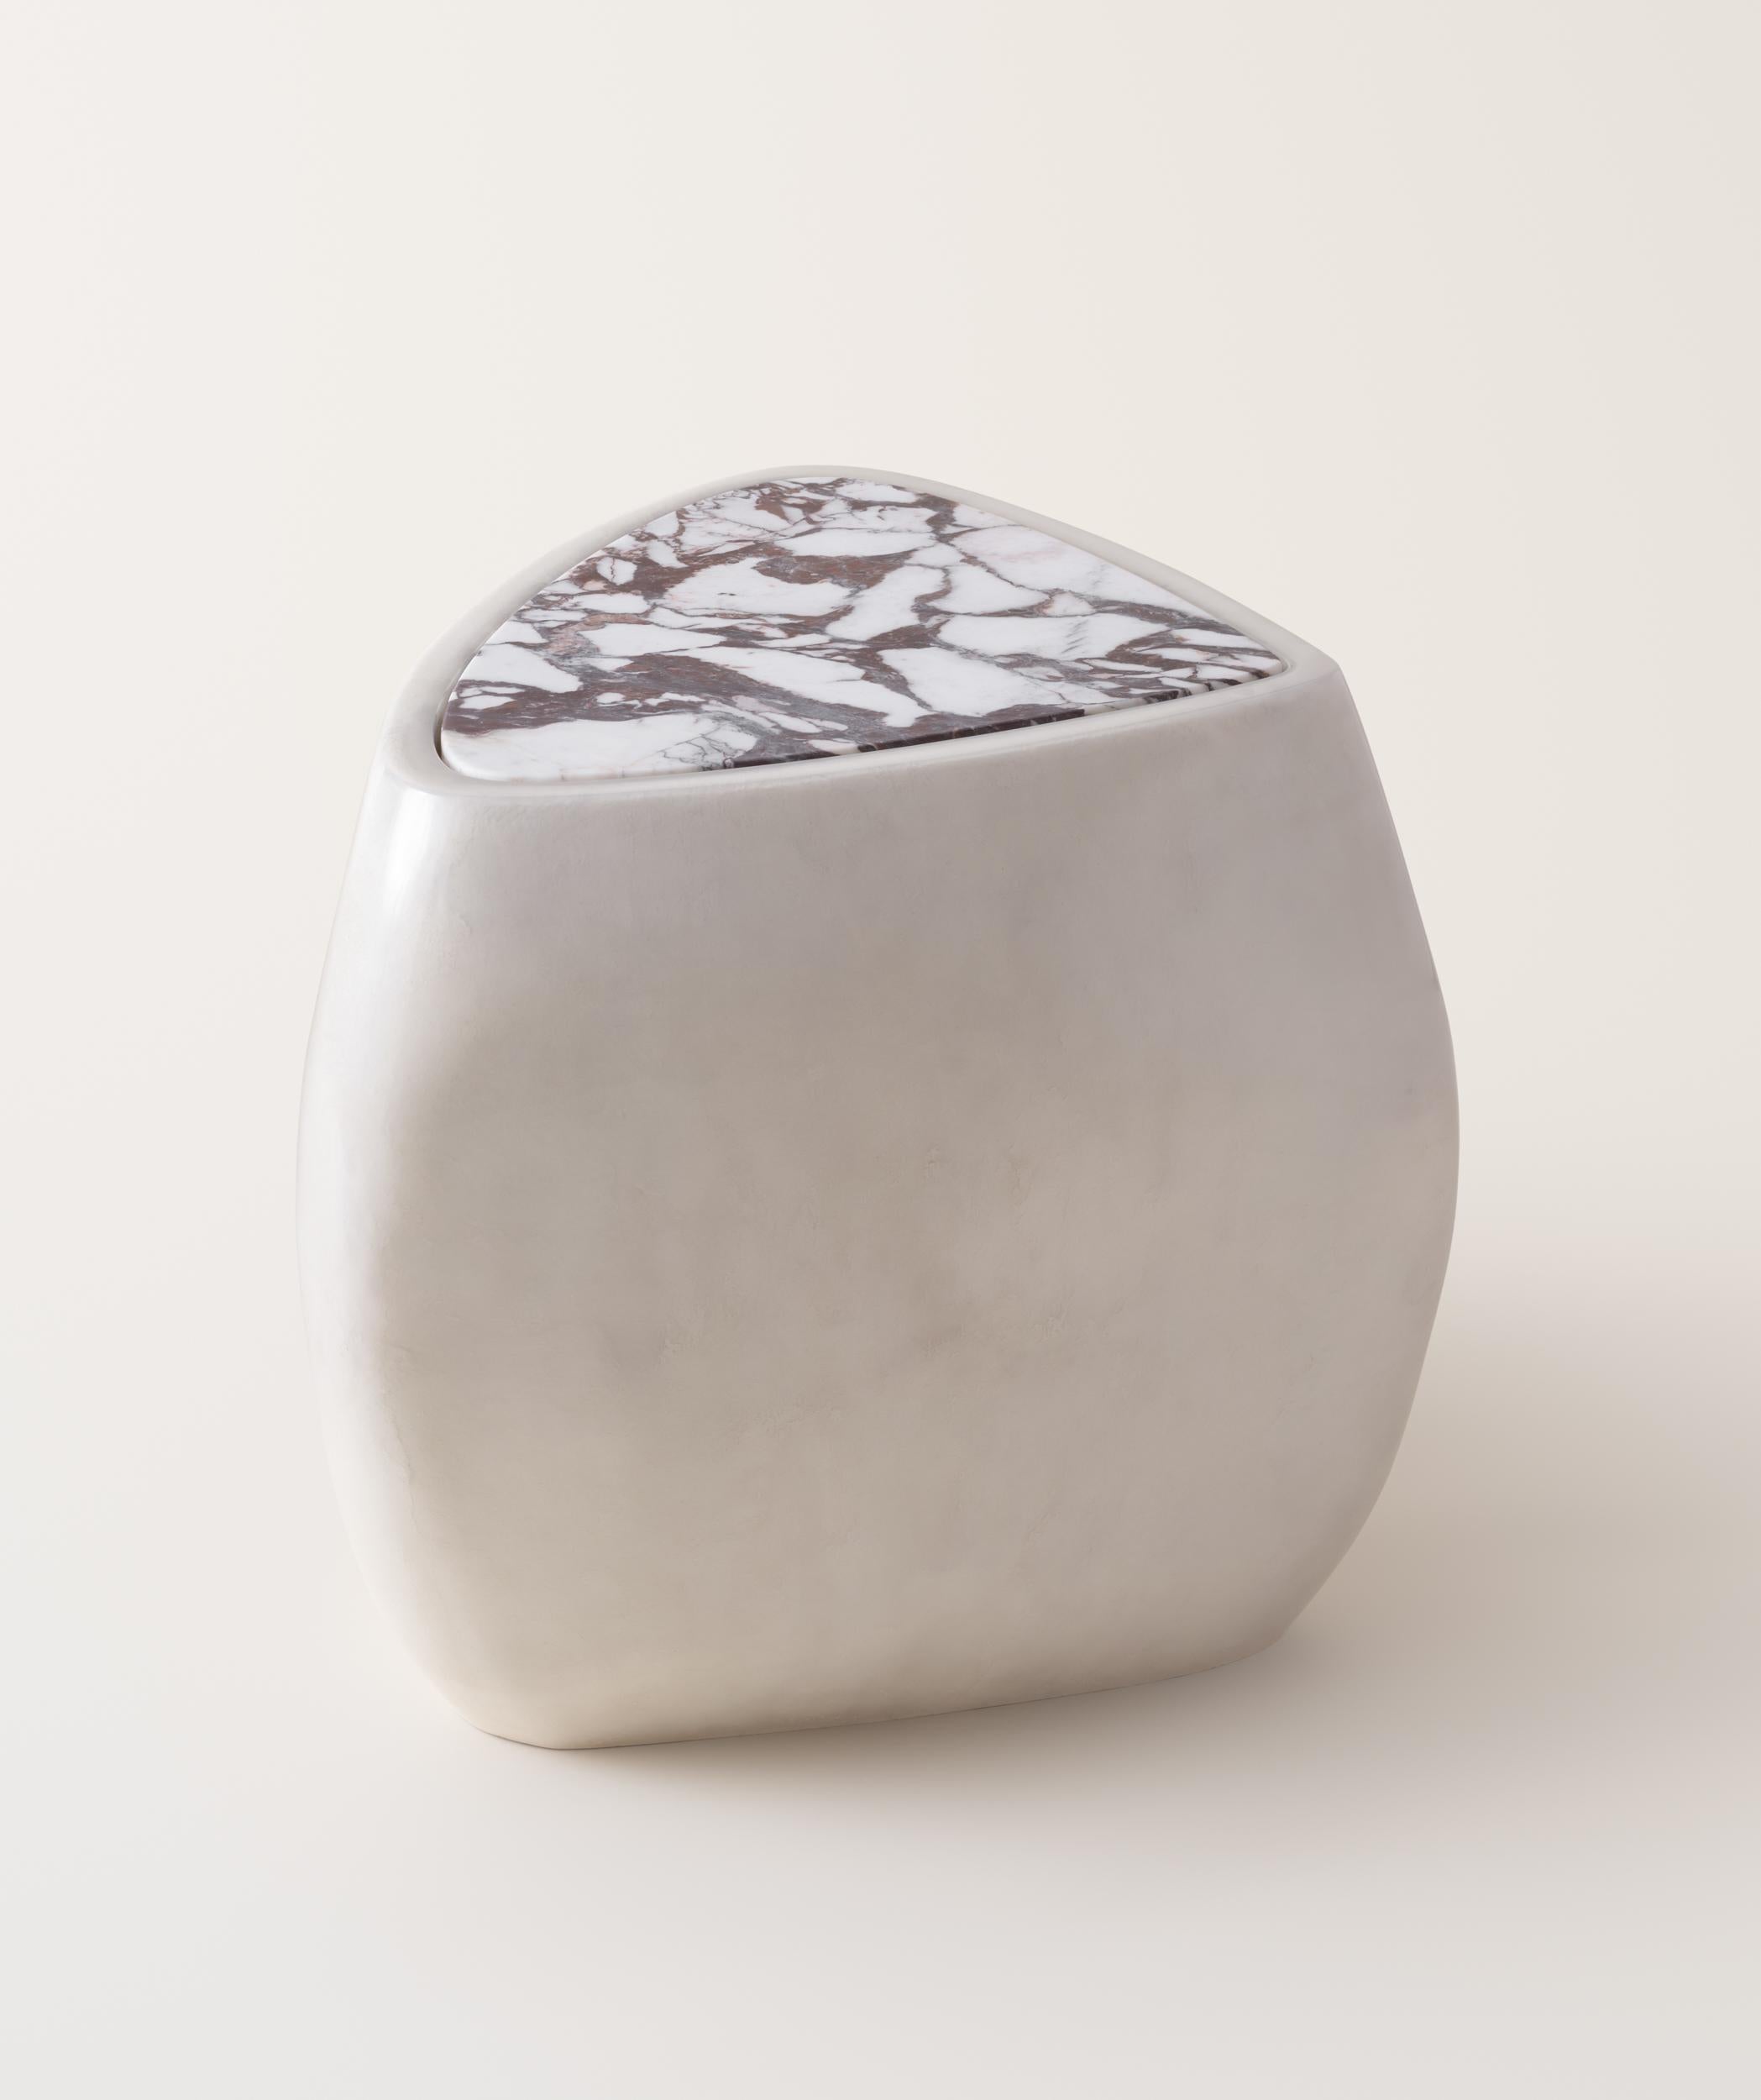 Inspired by stones shaped and polished by ever-evolving bodies of water, the River Side Table presents a sculptural, asymmetrical form made up of soft curves and lines. The table is expertly made by hand-layering fiberglass and gel coat over several